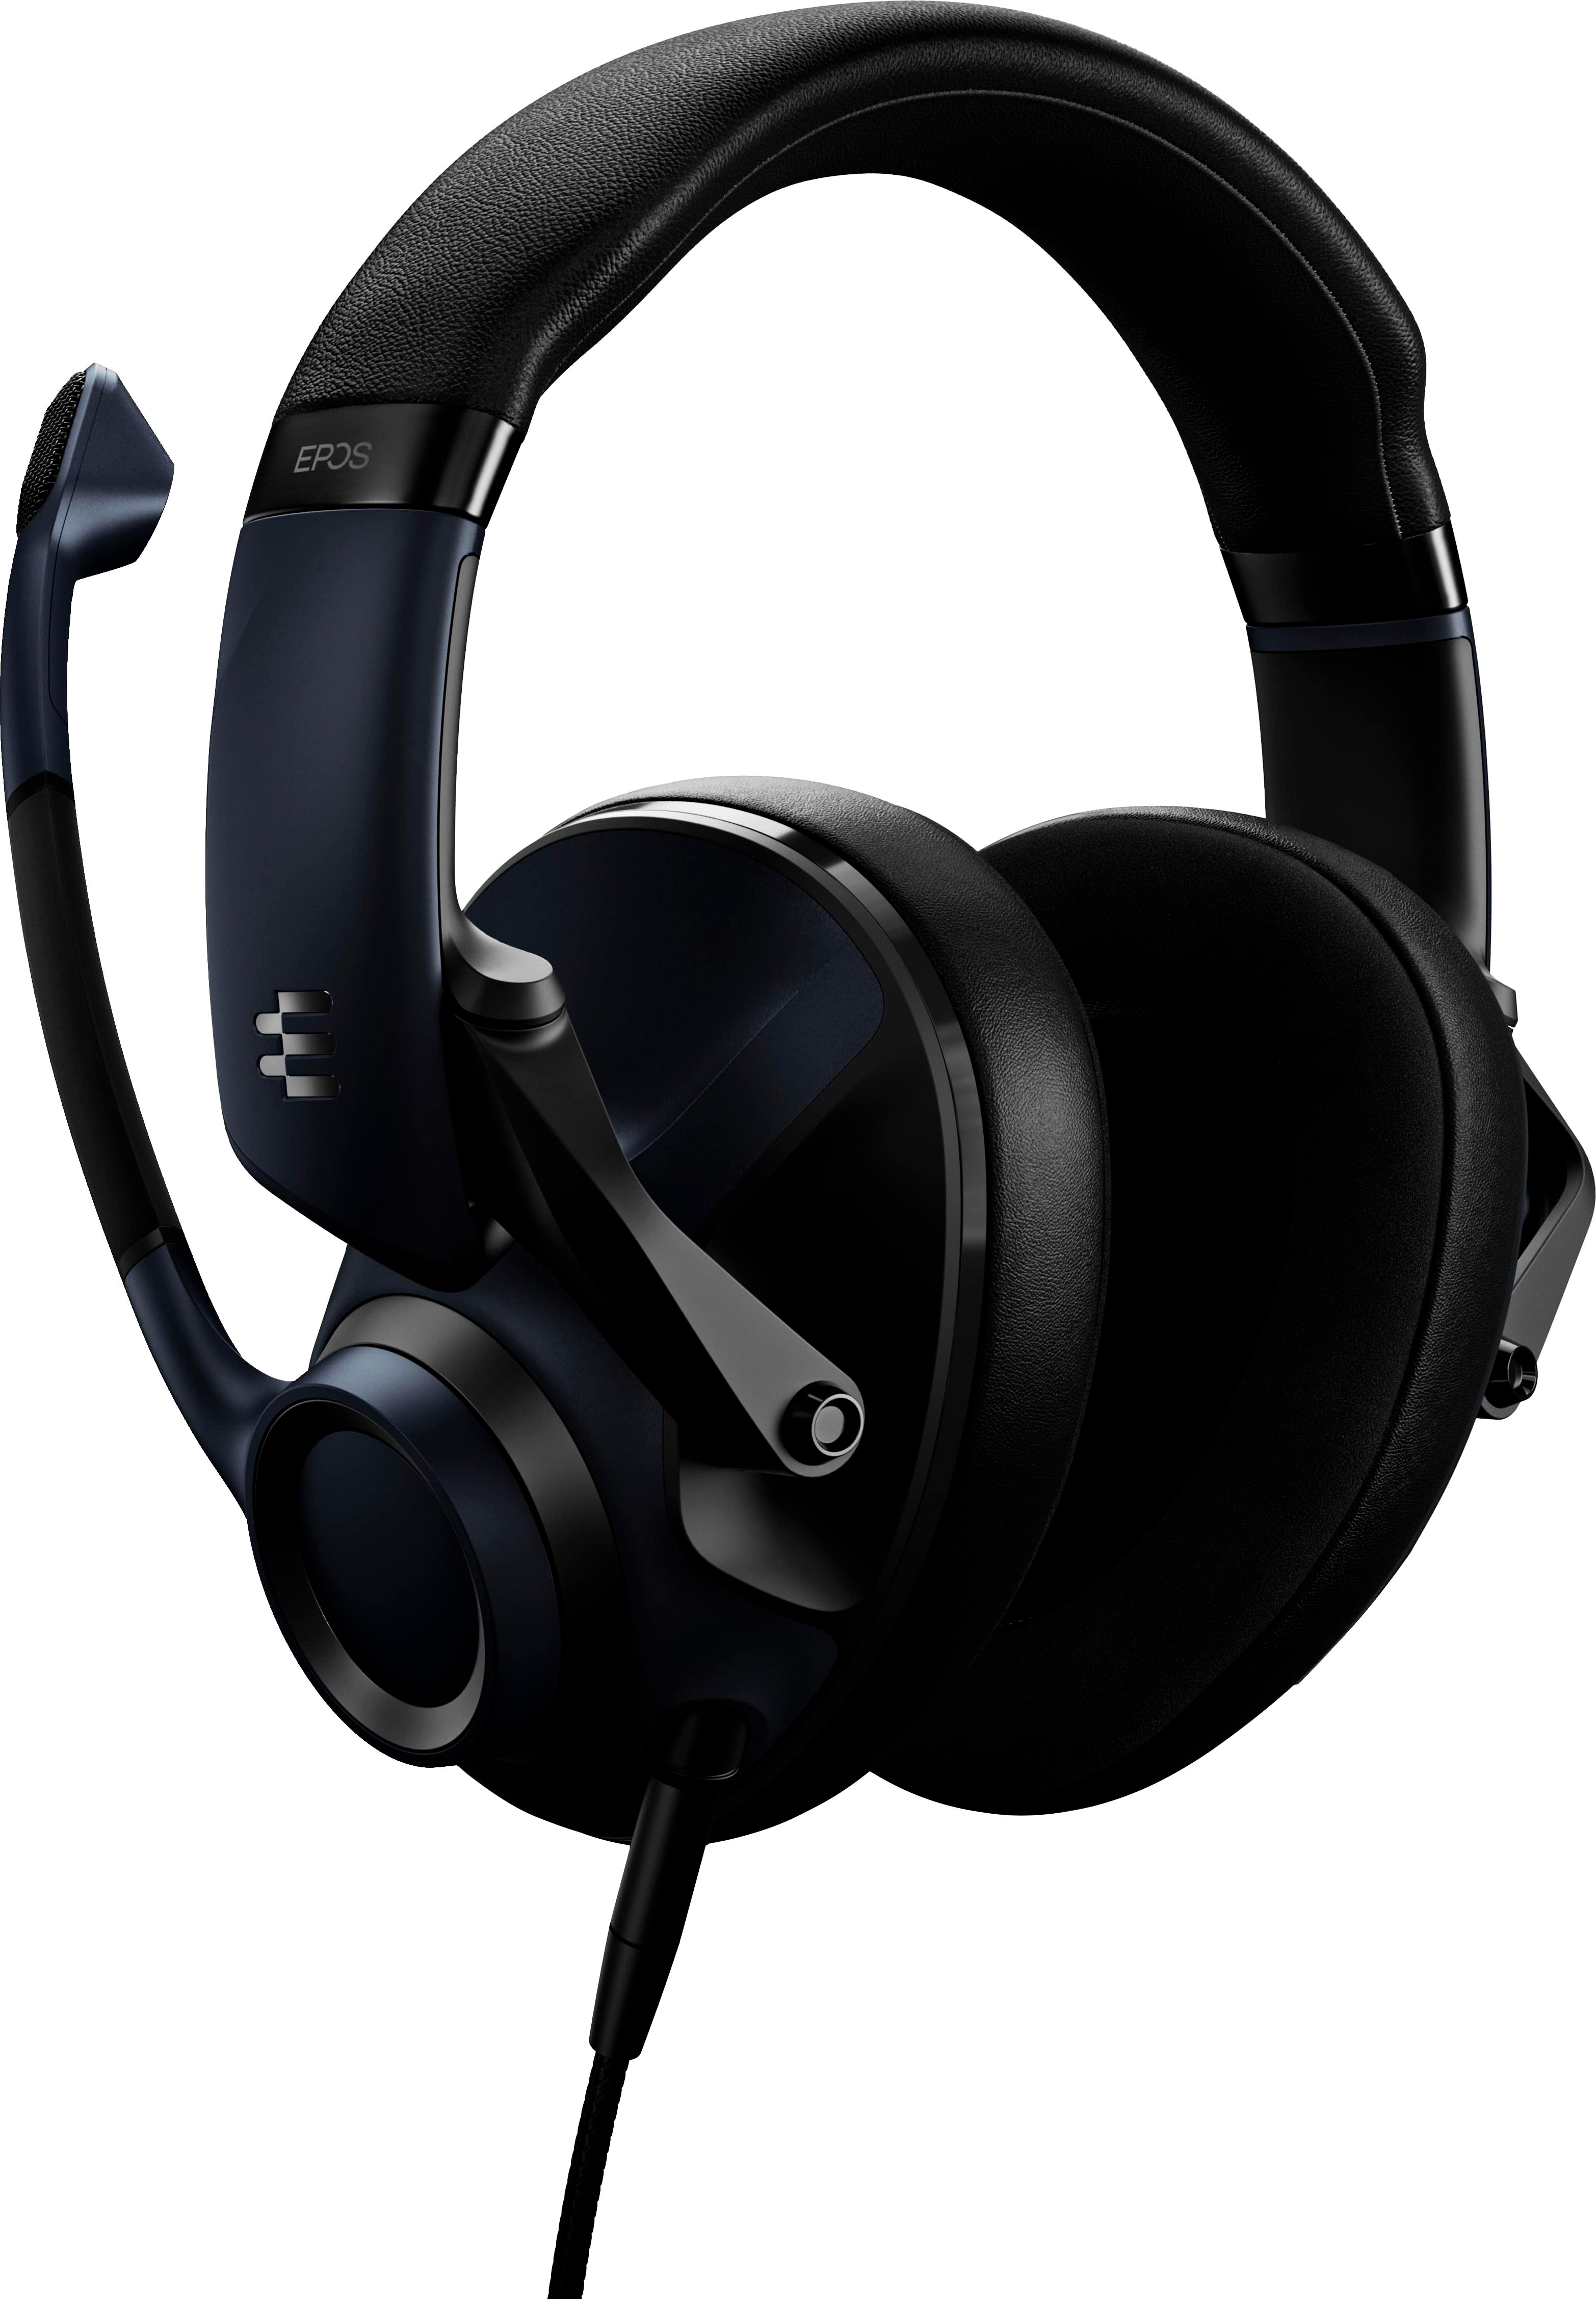 Angle View: EPOS - H6PRO Wired Closed Acoustic Gaming Headset - Sebring Black